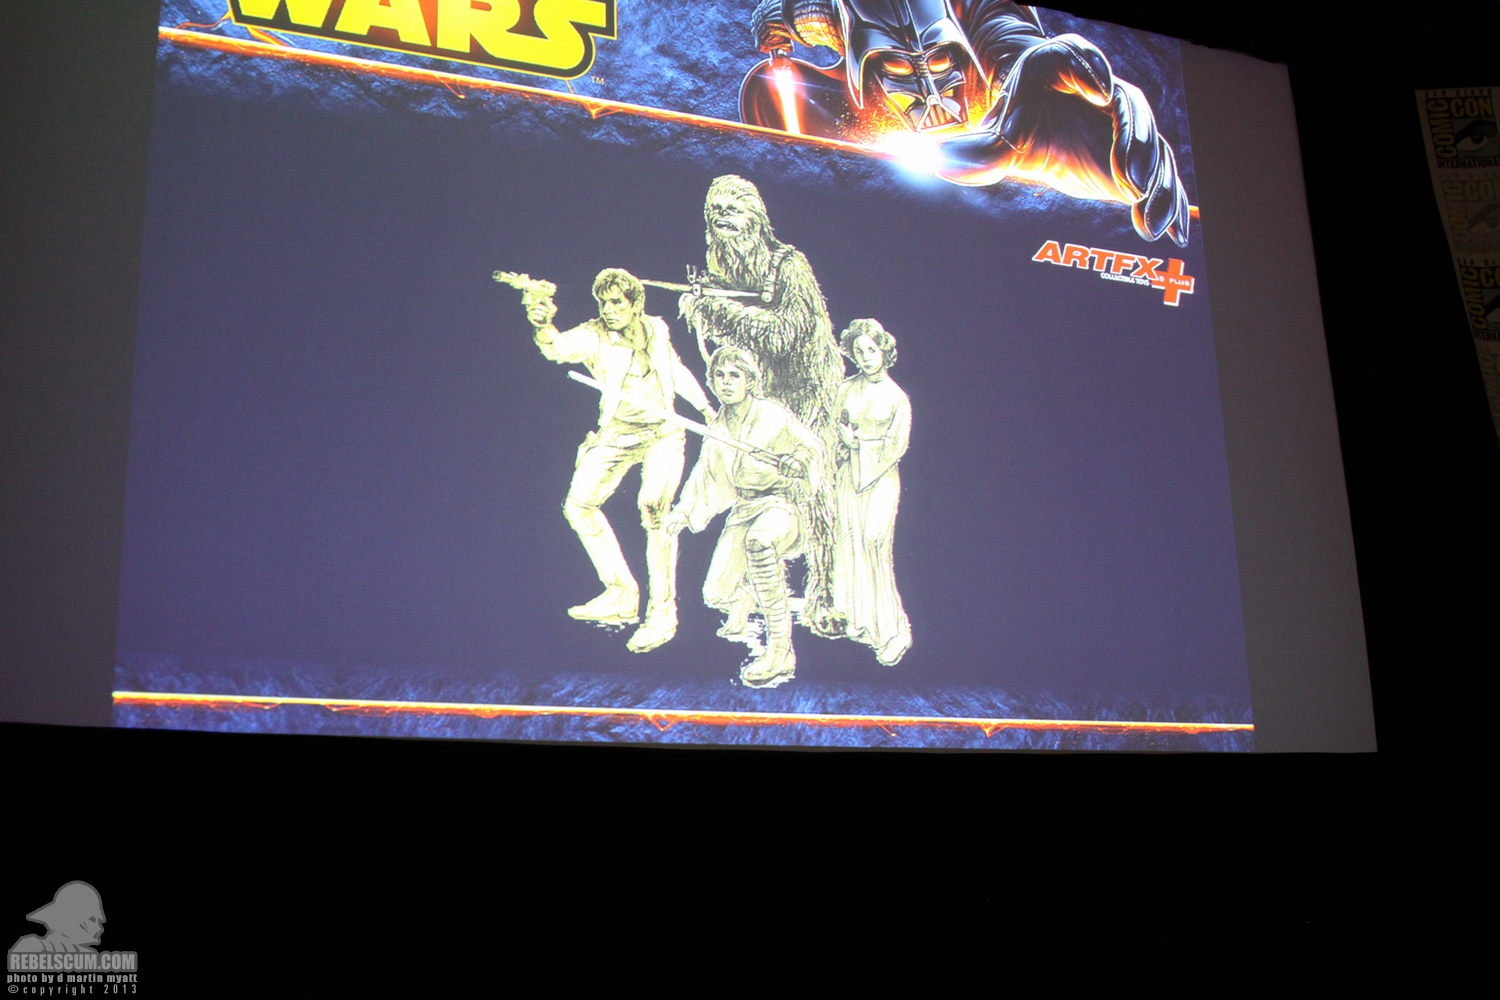 SDCC_2013_Star_Wars_Collecting_Panel_Friday-104.jpg